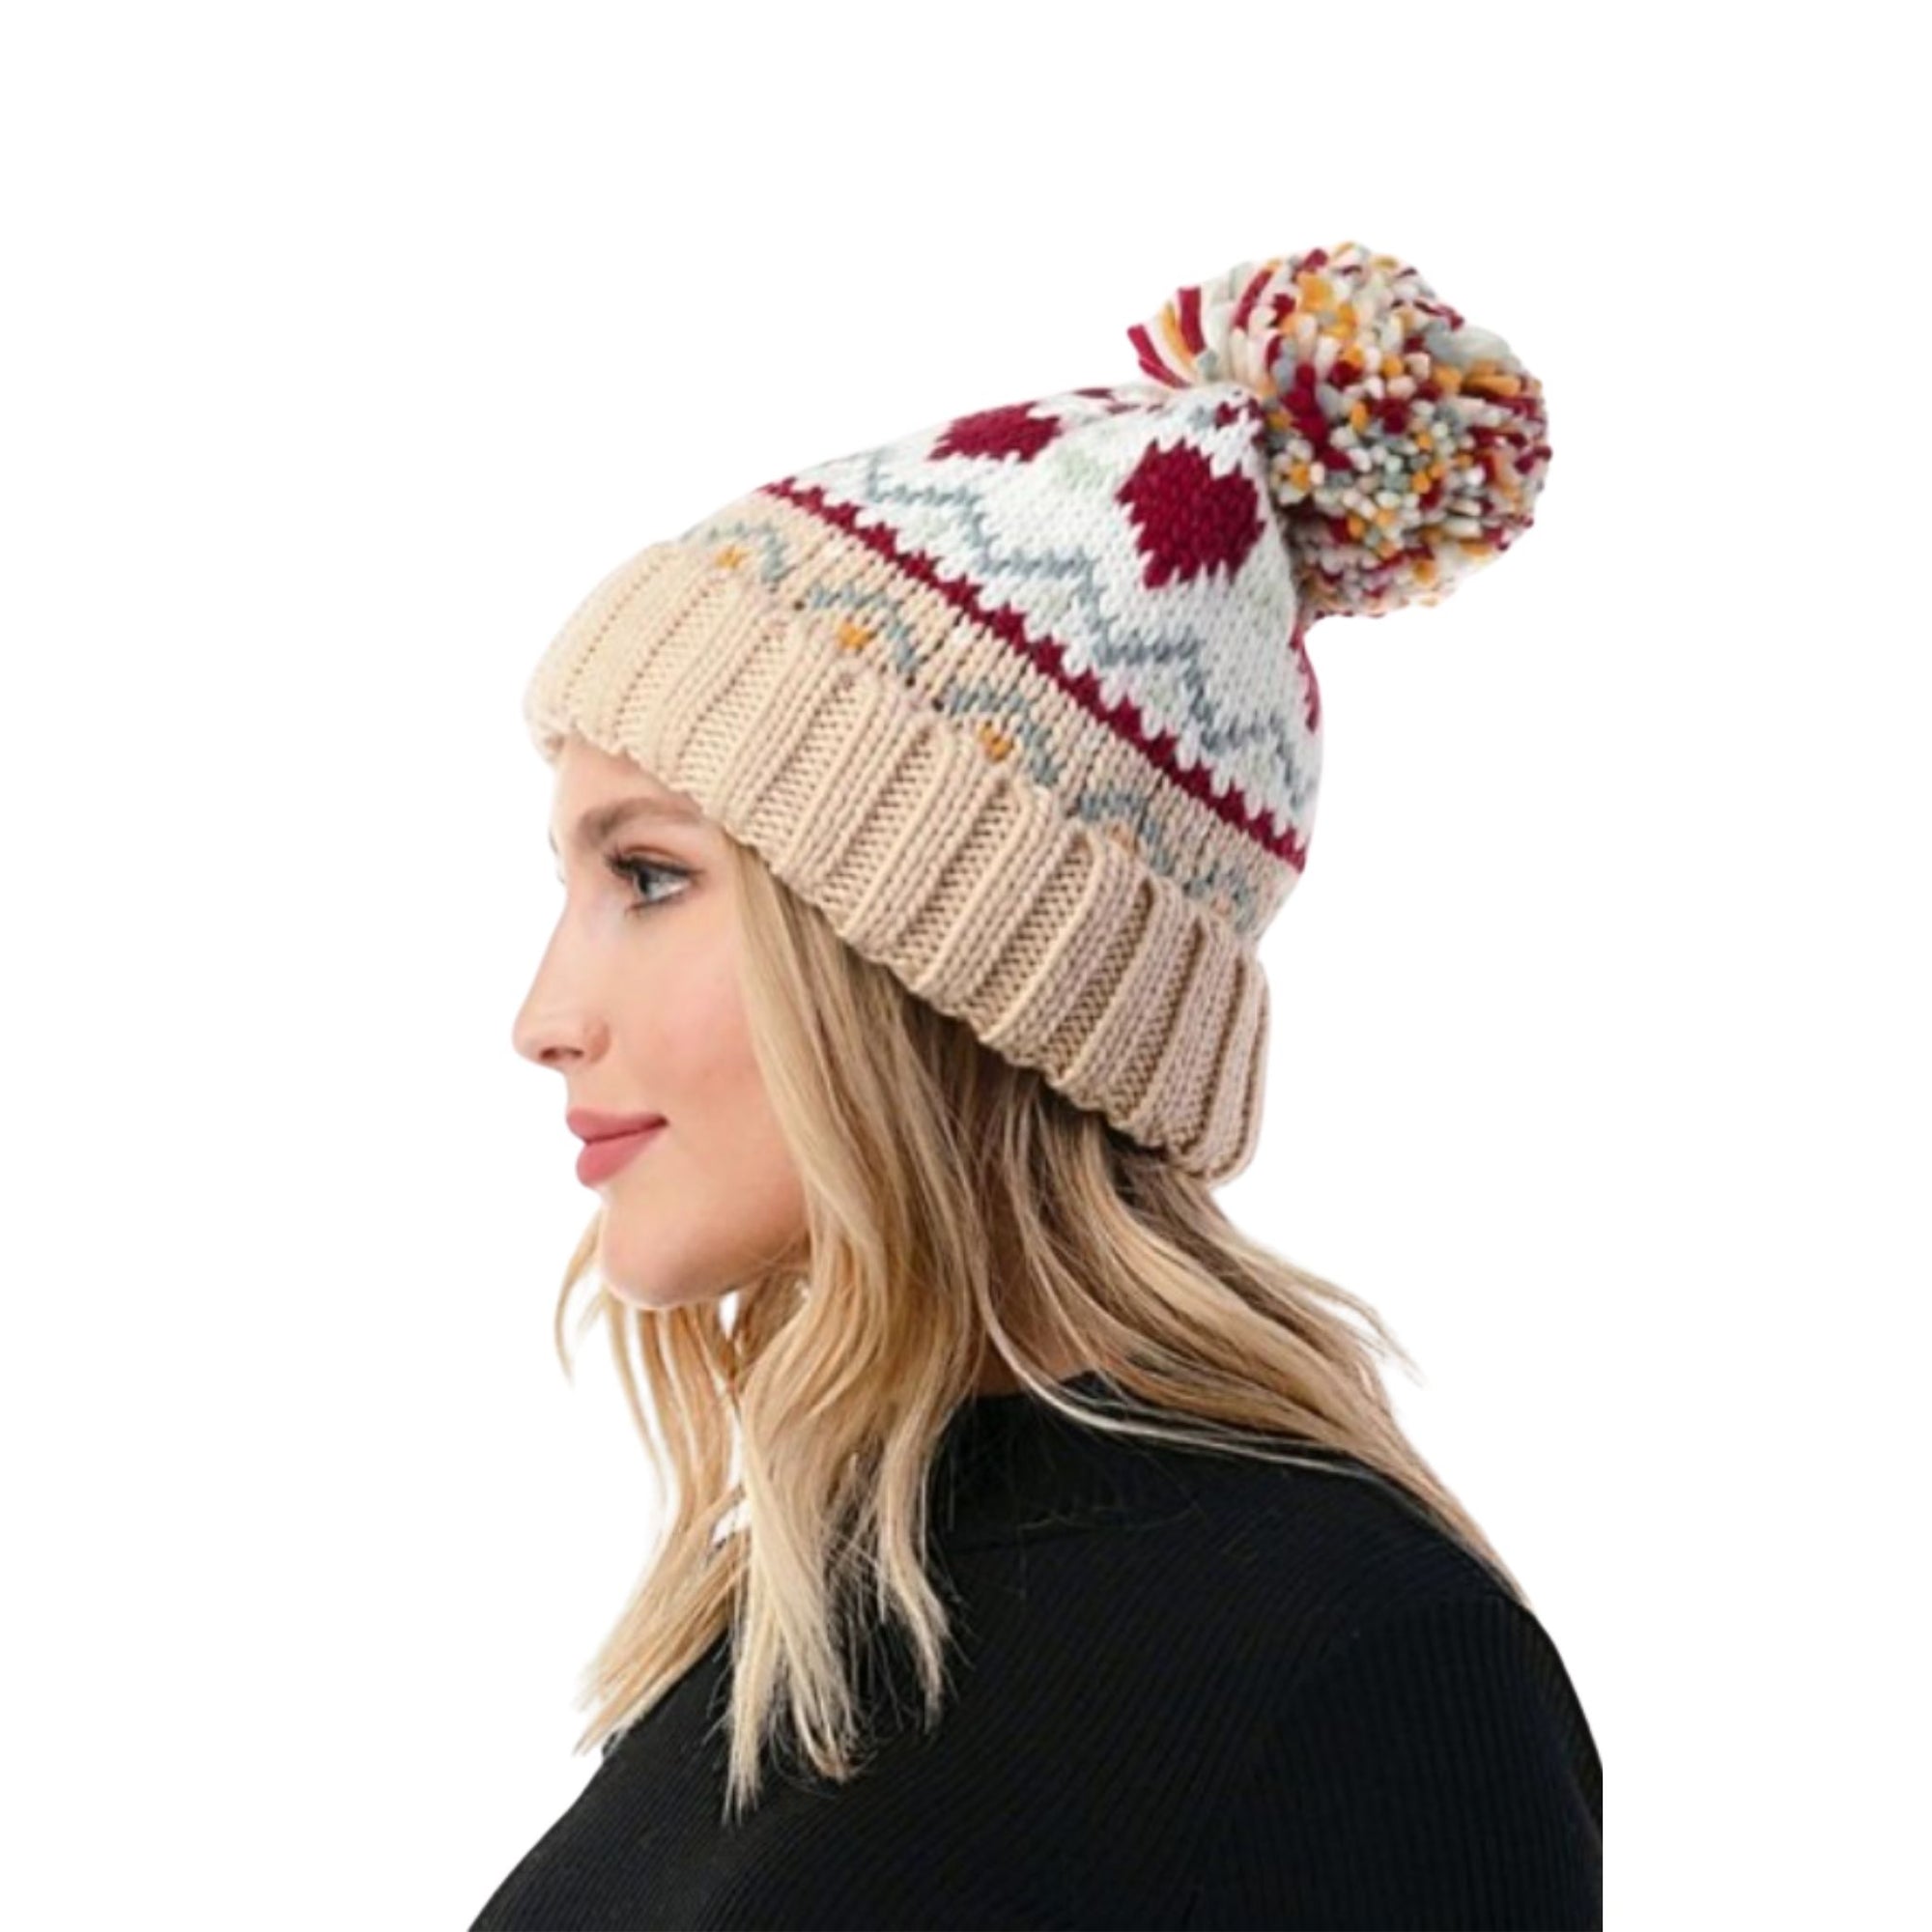 Multi-Colored Knit Heart Beanie with Pom